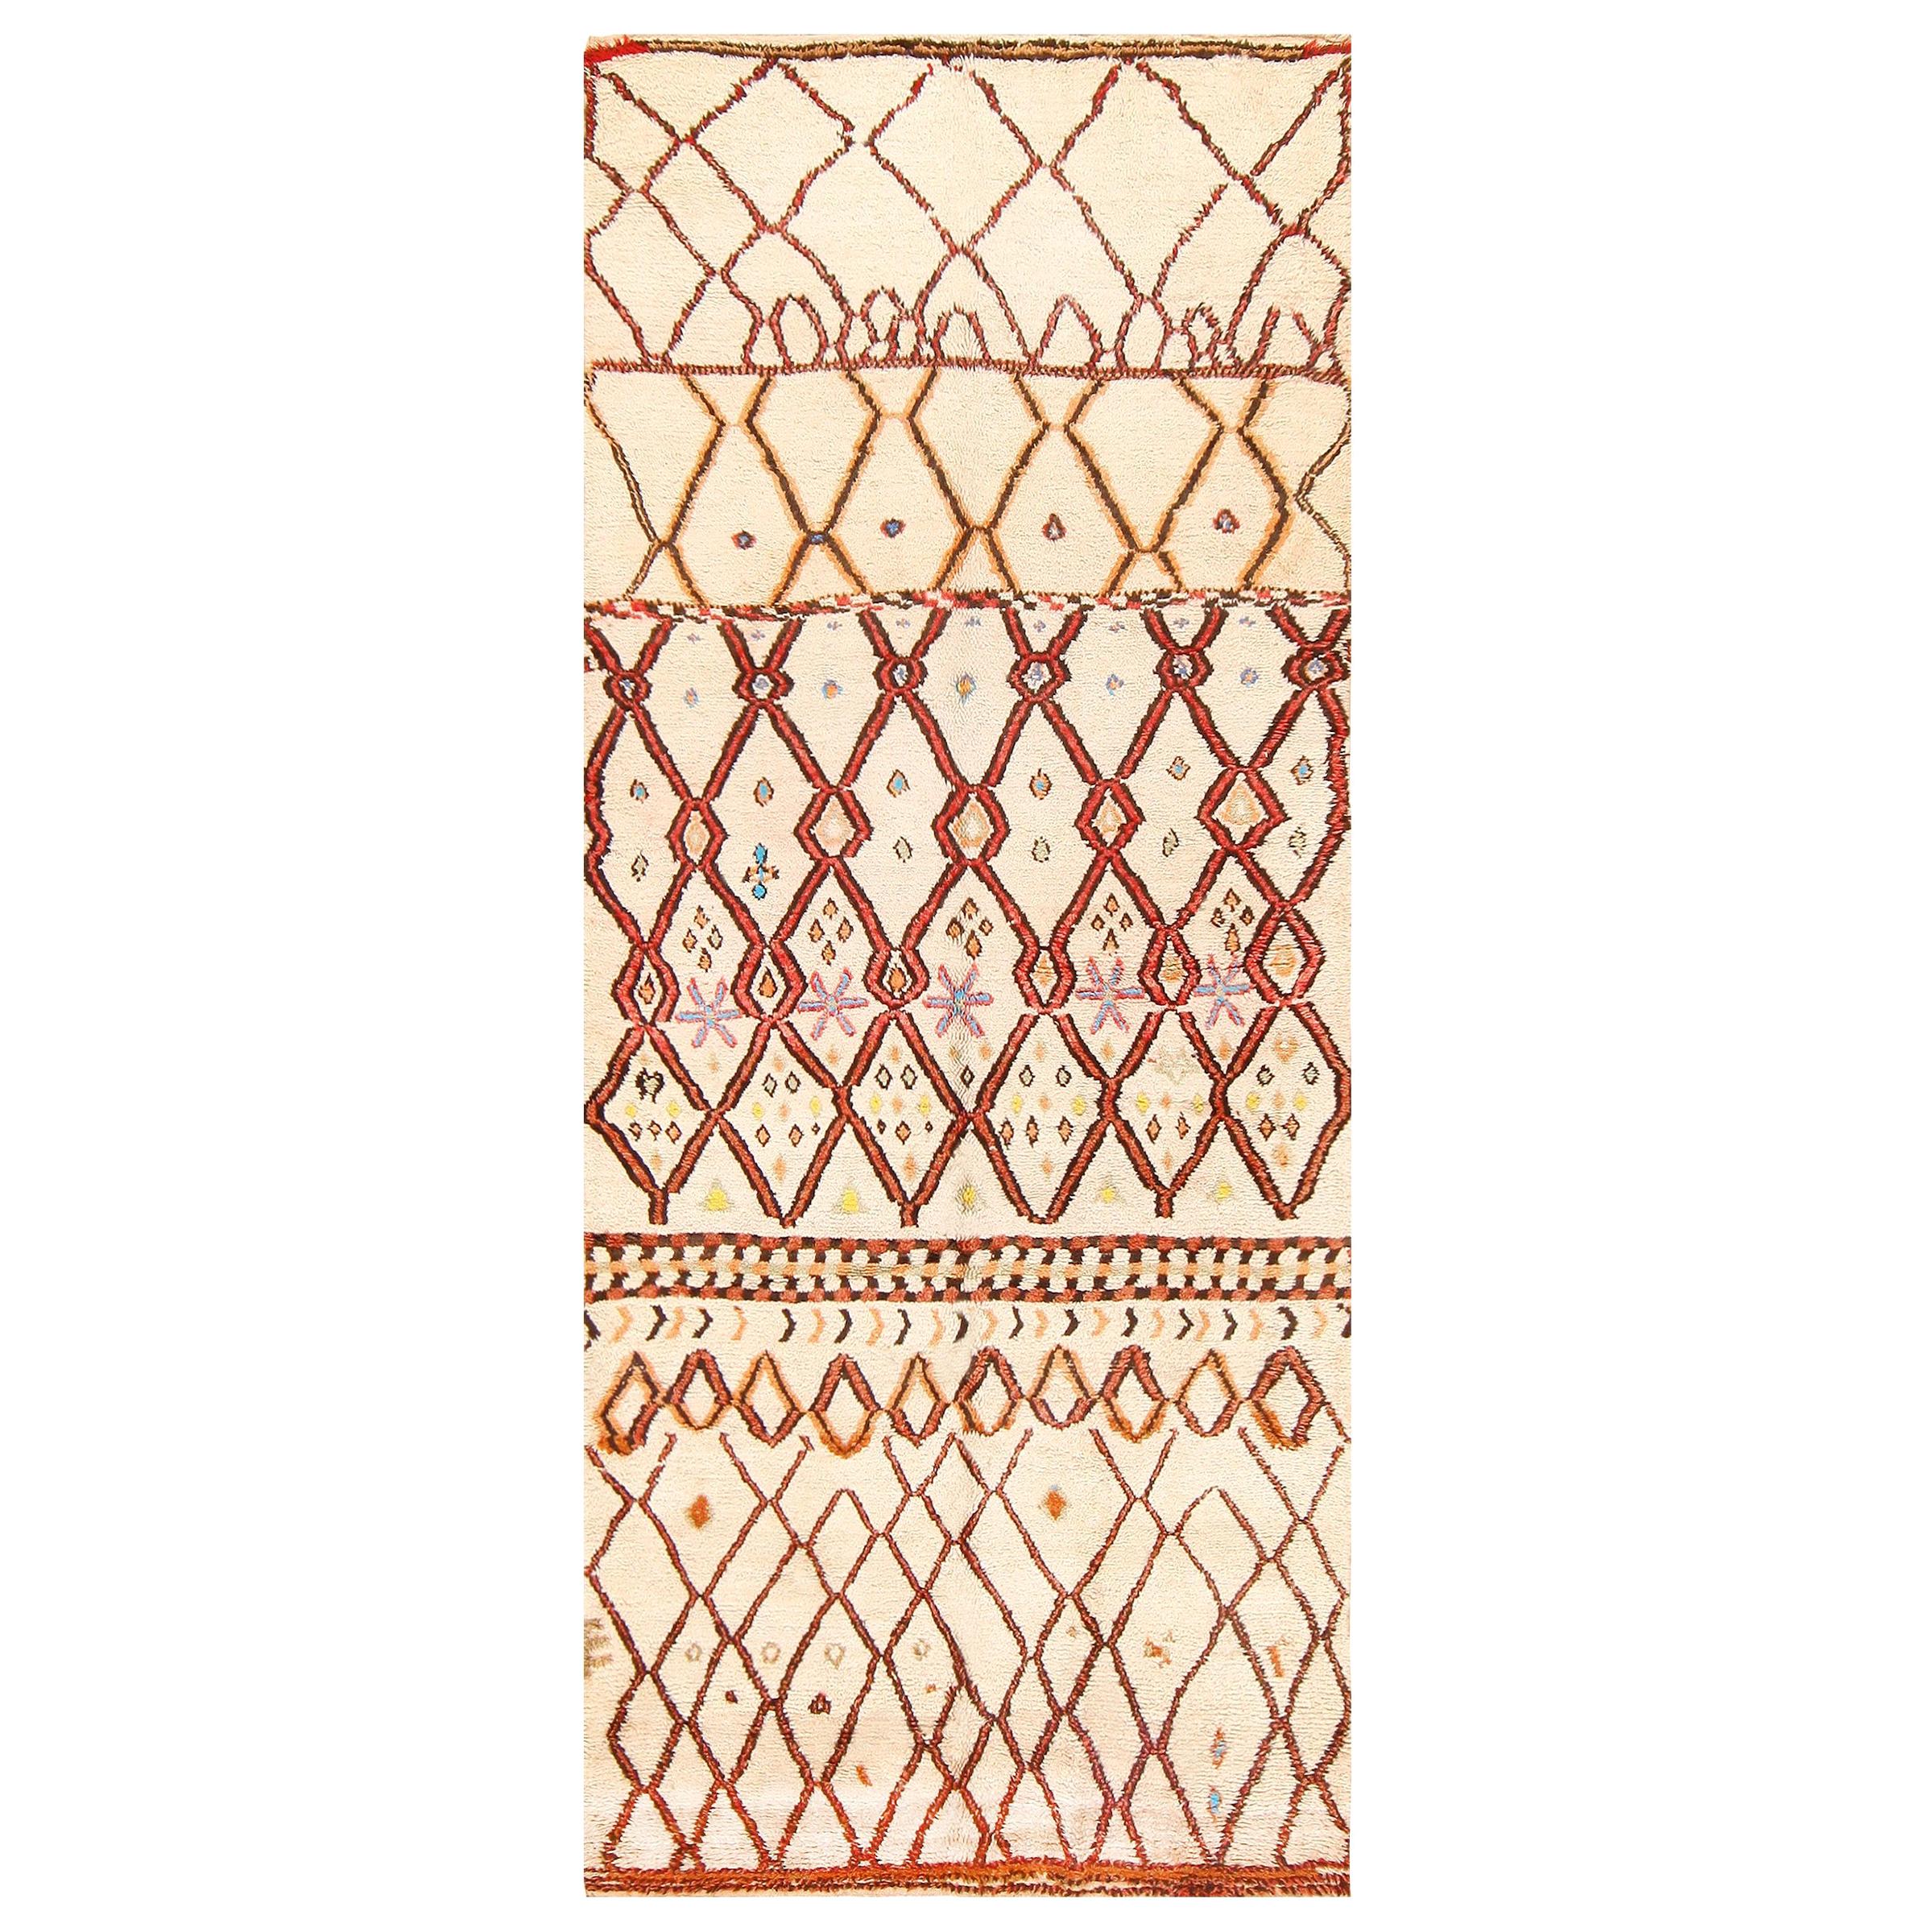 Nazmiyal Collection Vintage Tribal Moroccan Rug. Size: 6 ft x 14 ft